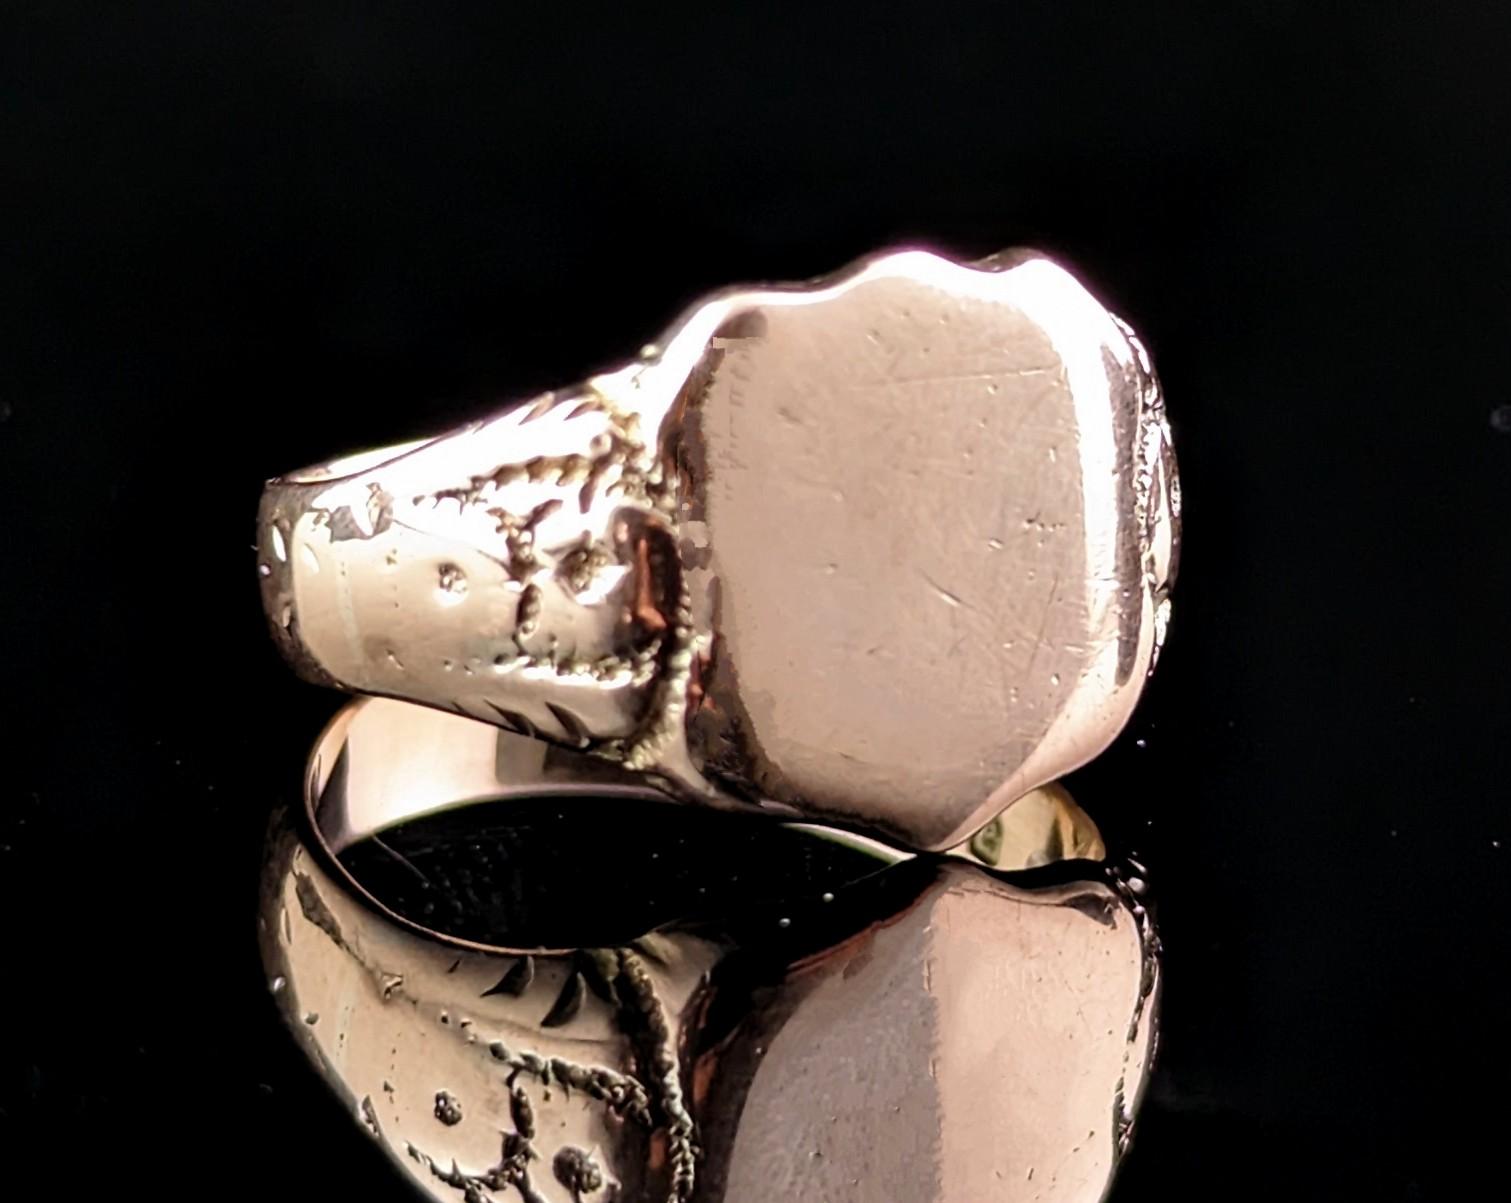 This handsome antique 9kt Rose gold signet ring has a warm cherished charm about it and a rich golden glow only found on older pieces.

It is a rose gold with pinky tones in 9kt.

It has a shield shaped face with no engraving or monograms so could